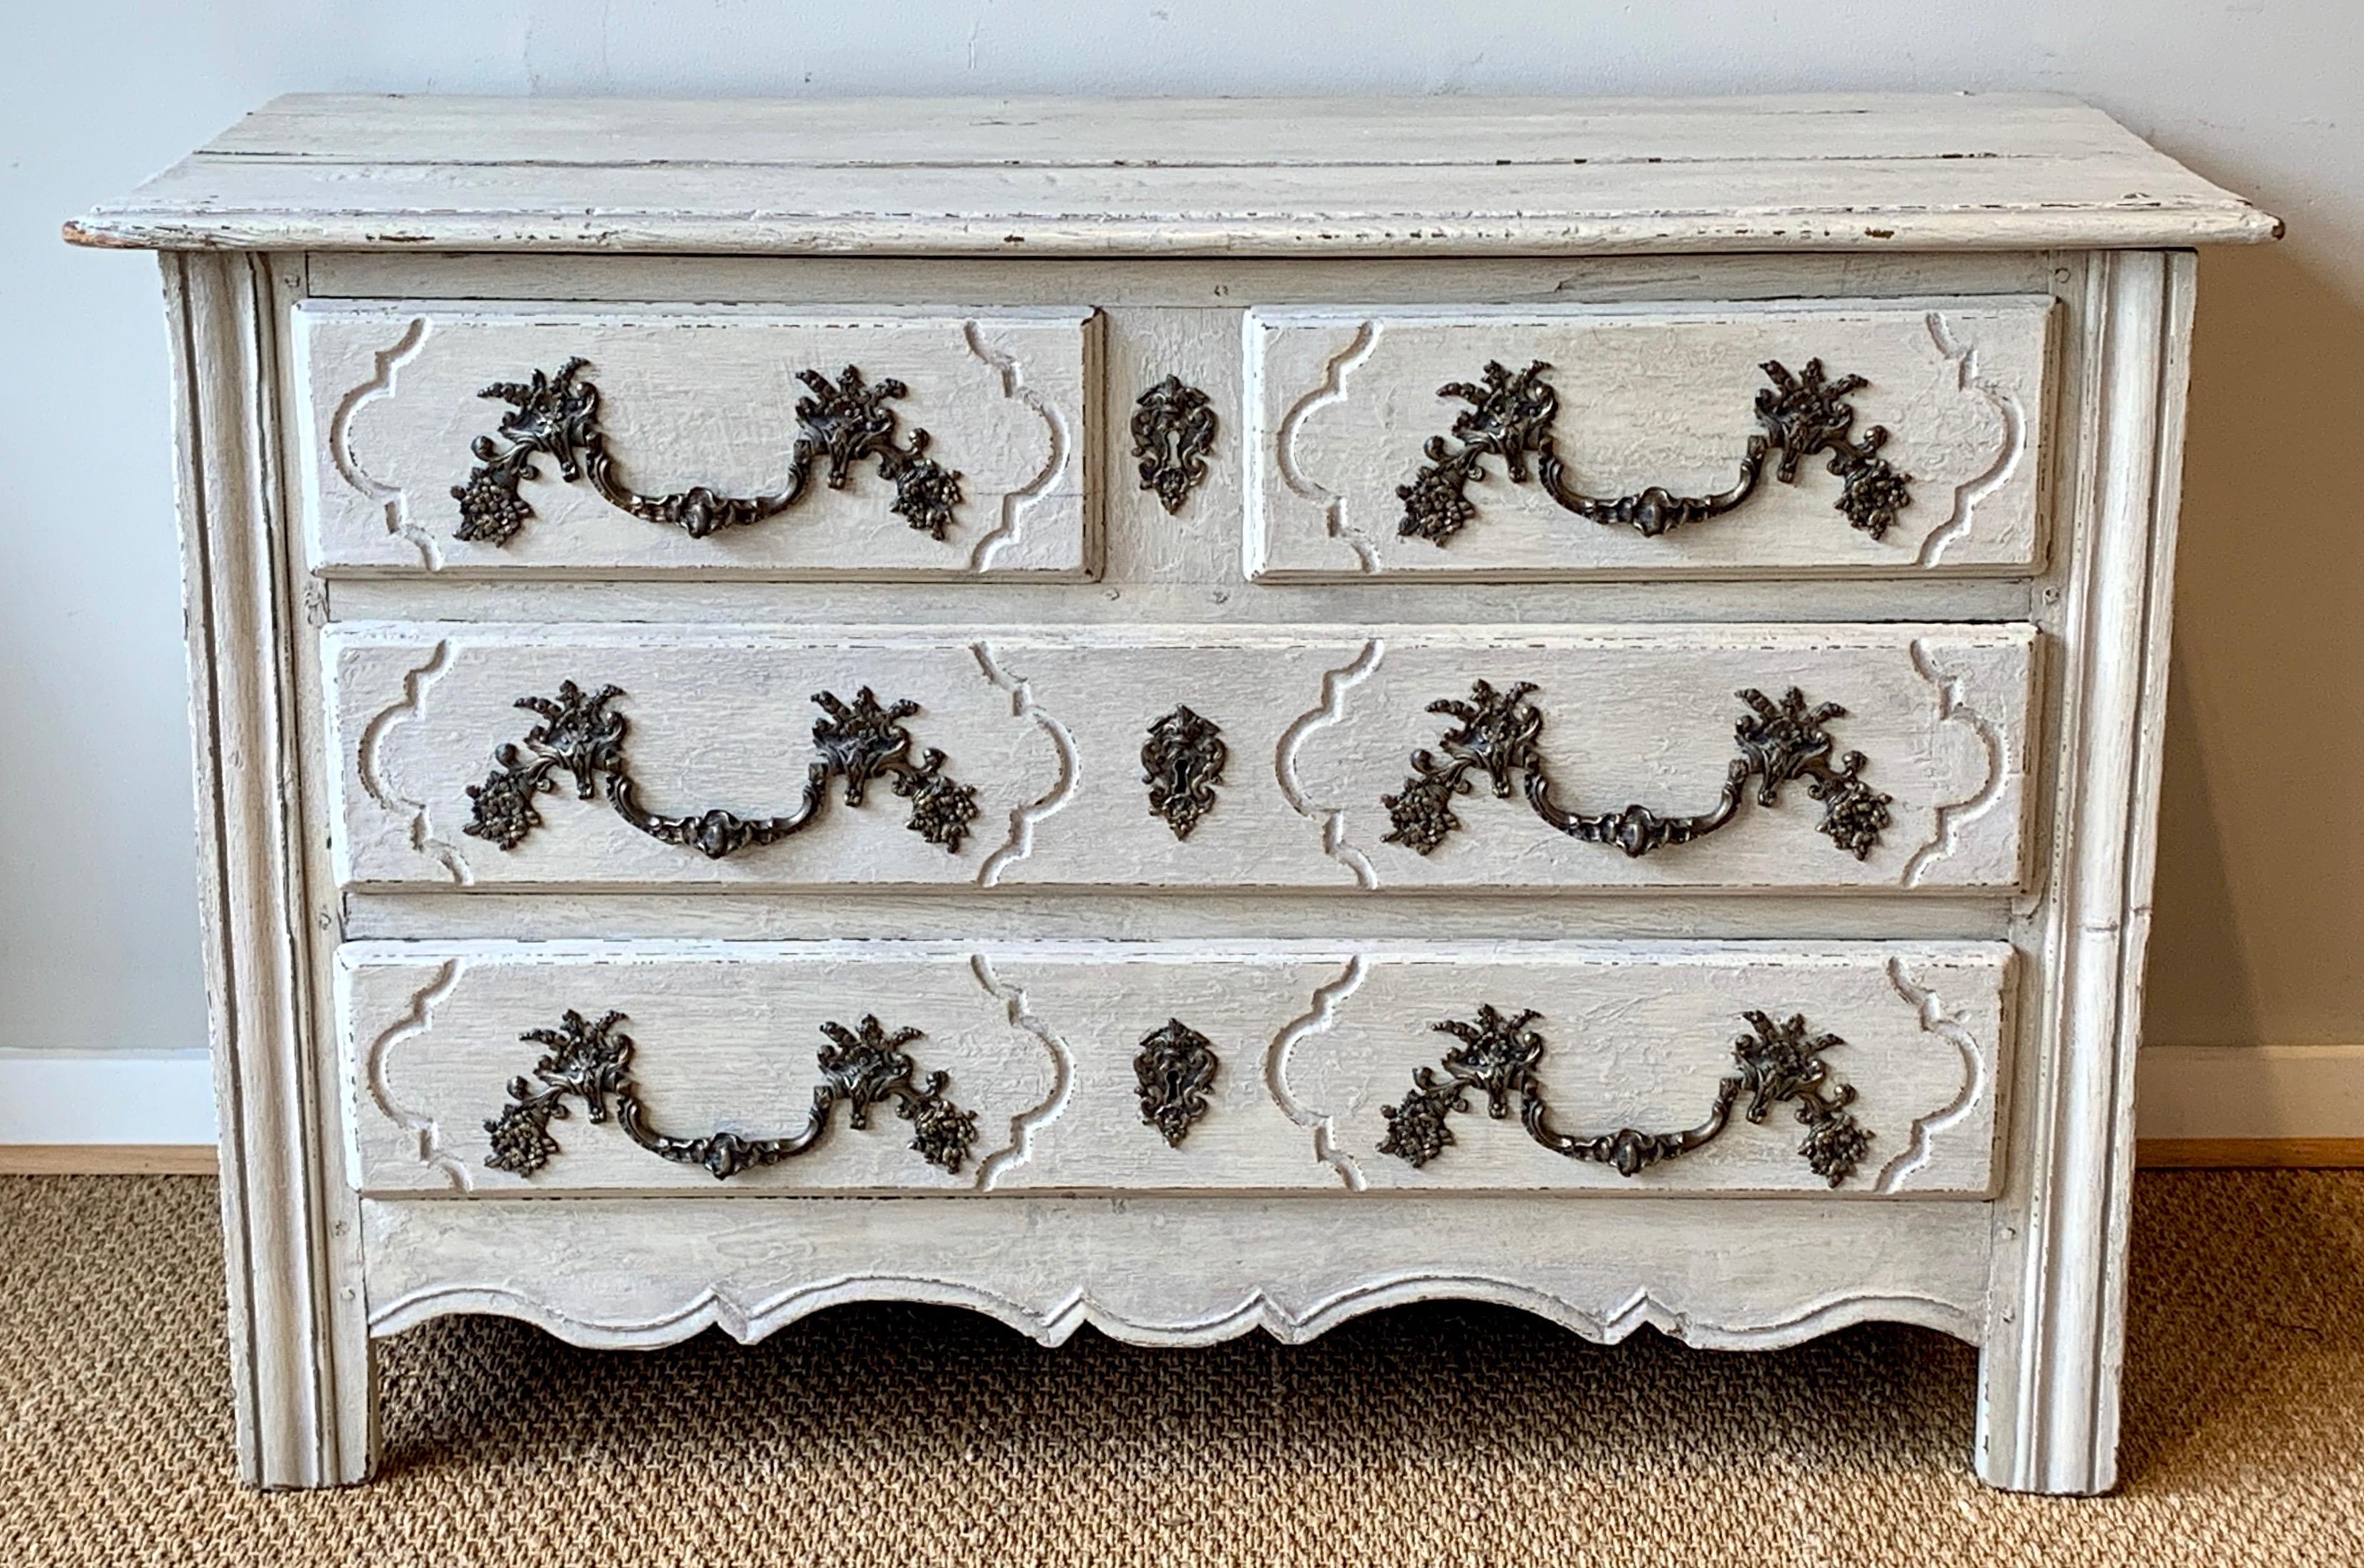 A late 18th century French carved and painted four-drawer oak commode in a soft gray paint with later cast brass pulls.